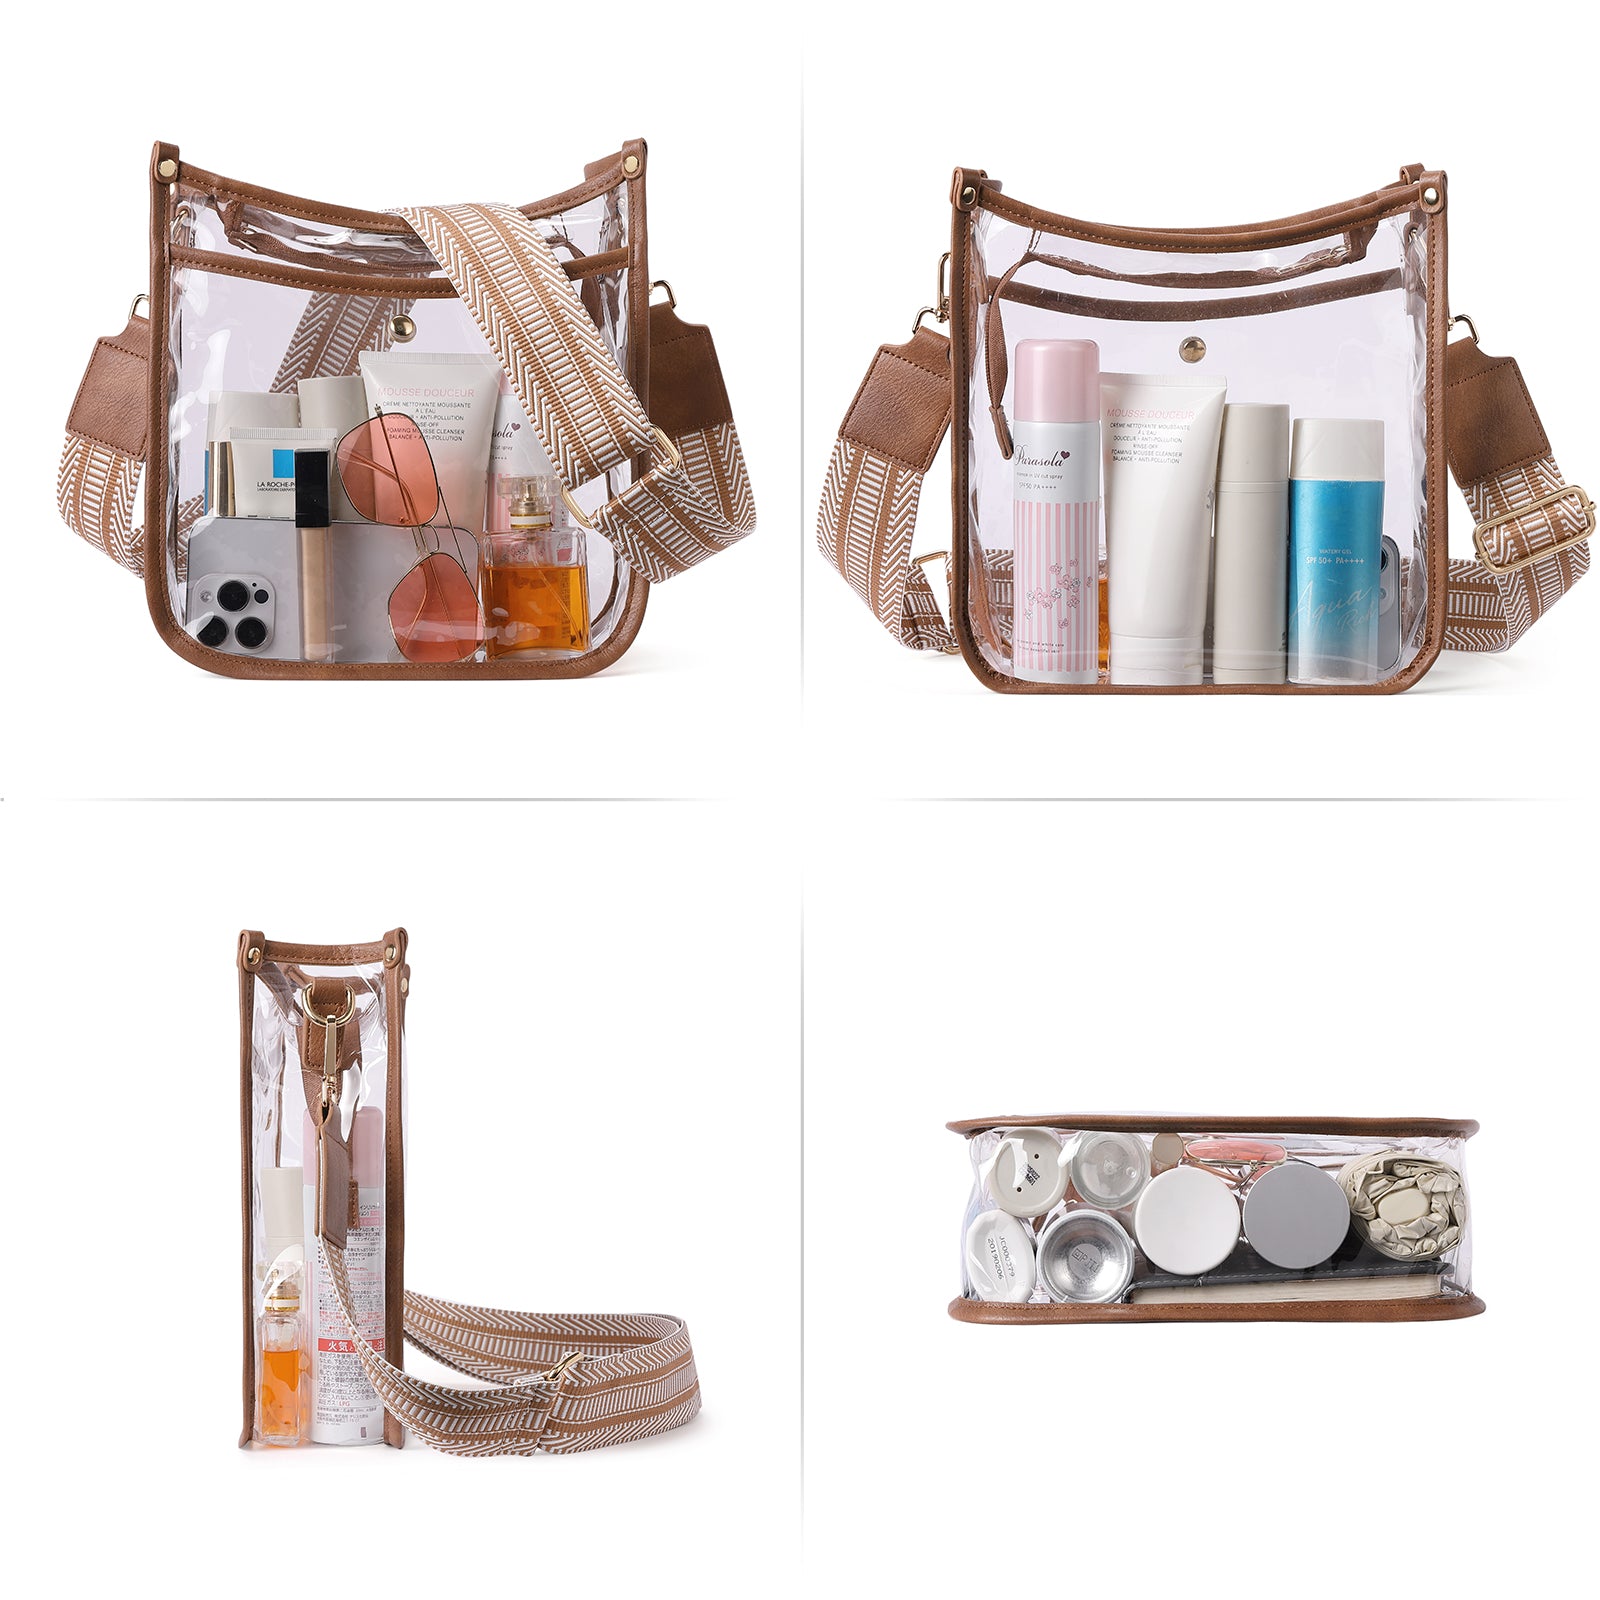 Clear Crossbody Purse Bag Stadium Approved For Women With Two Straps